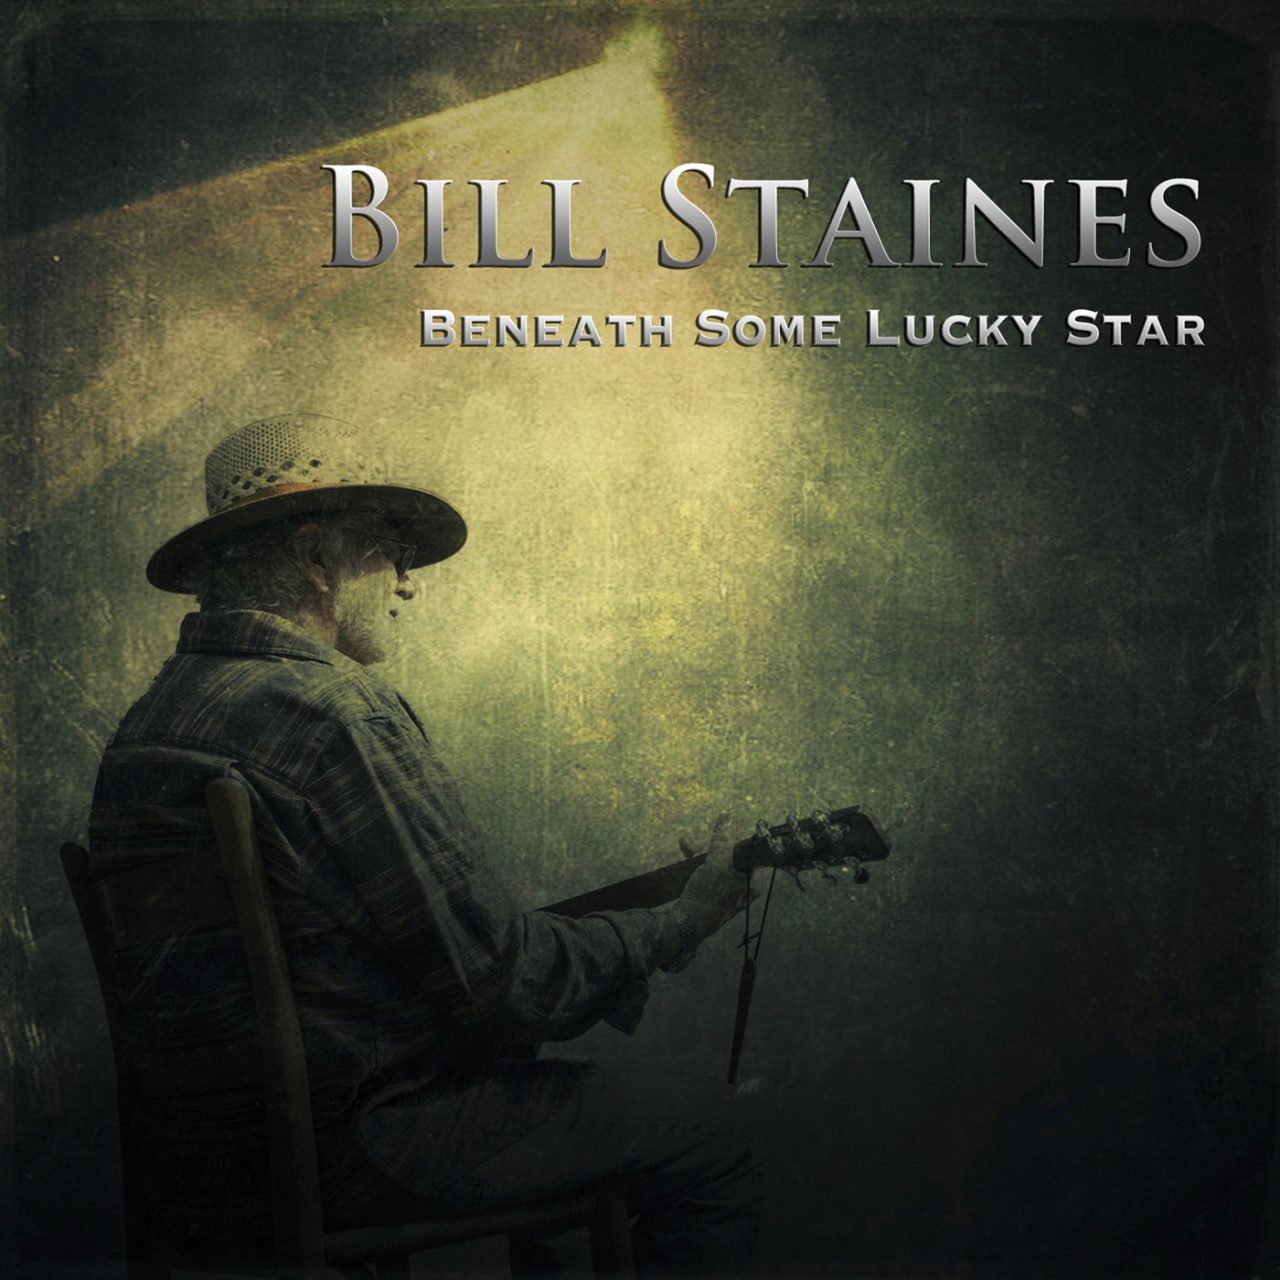 Bill Staines - Beneath Some Lucky Star cover album